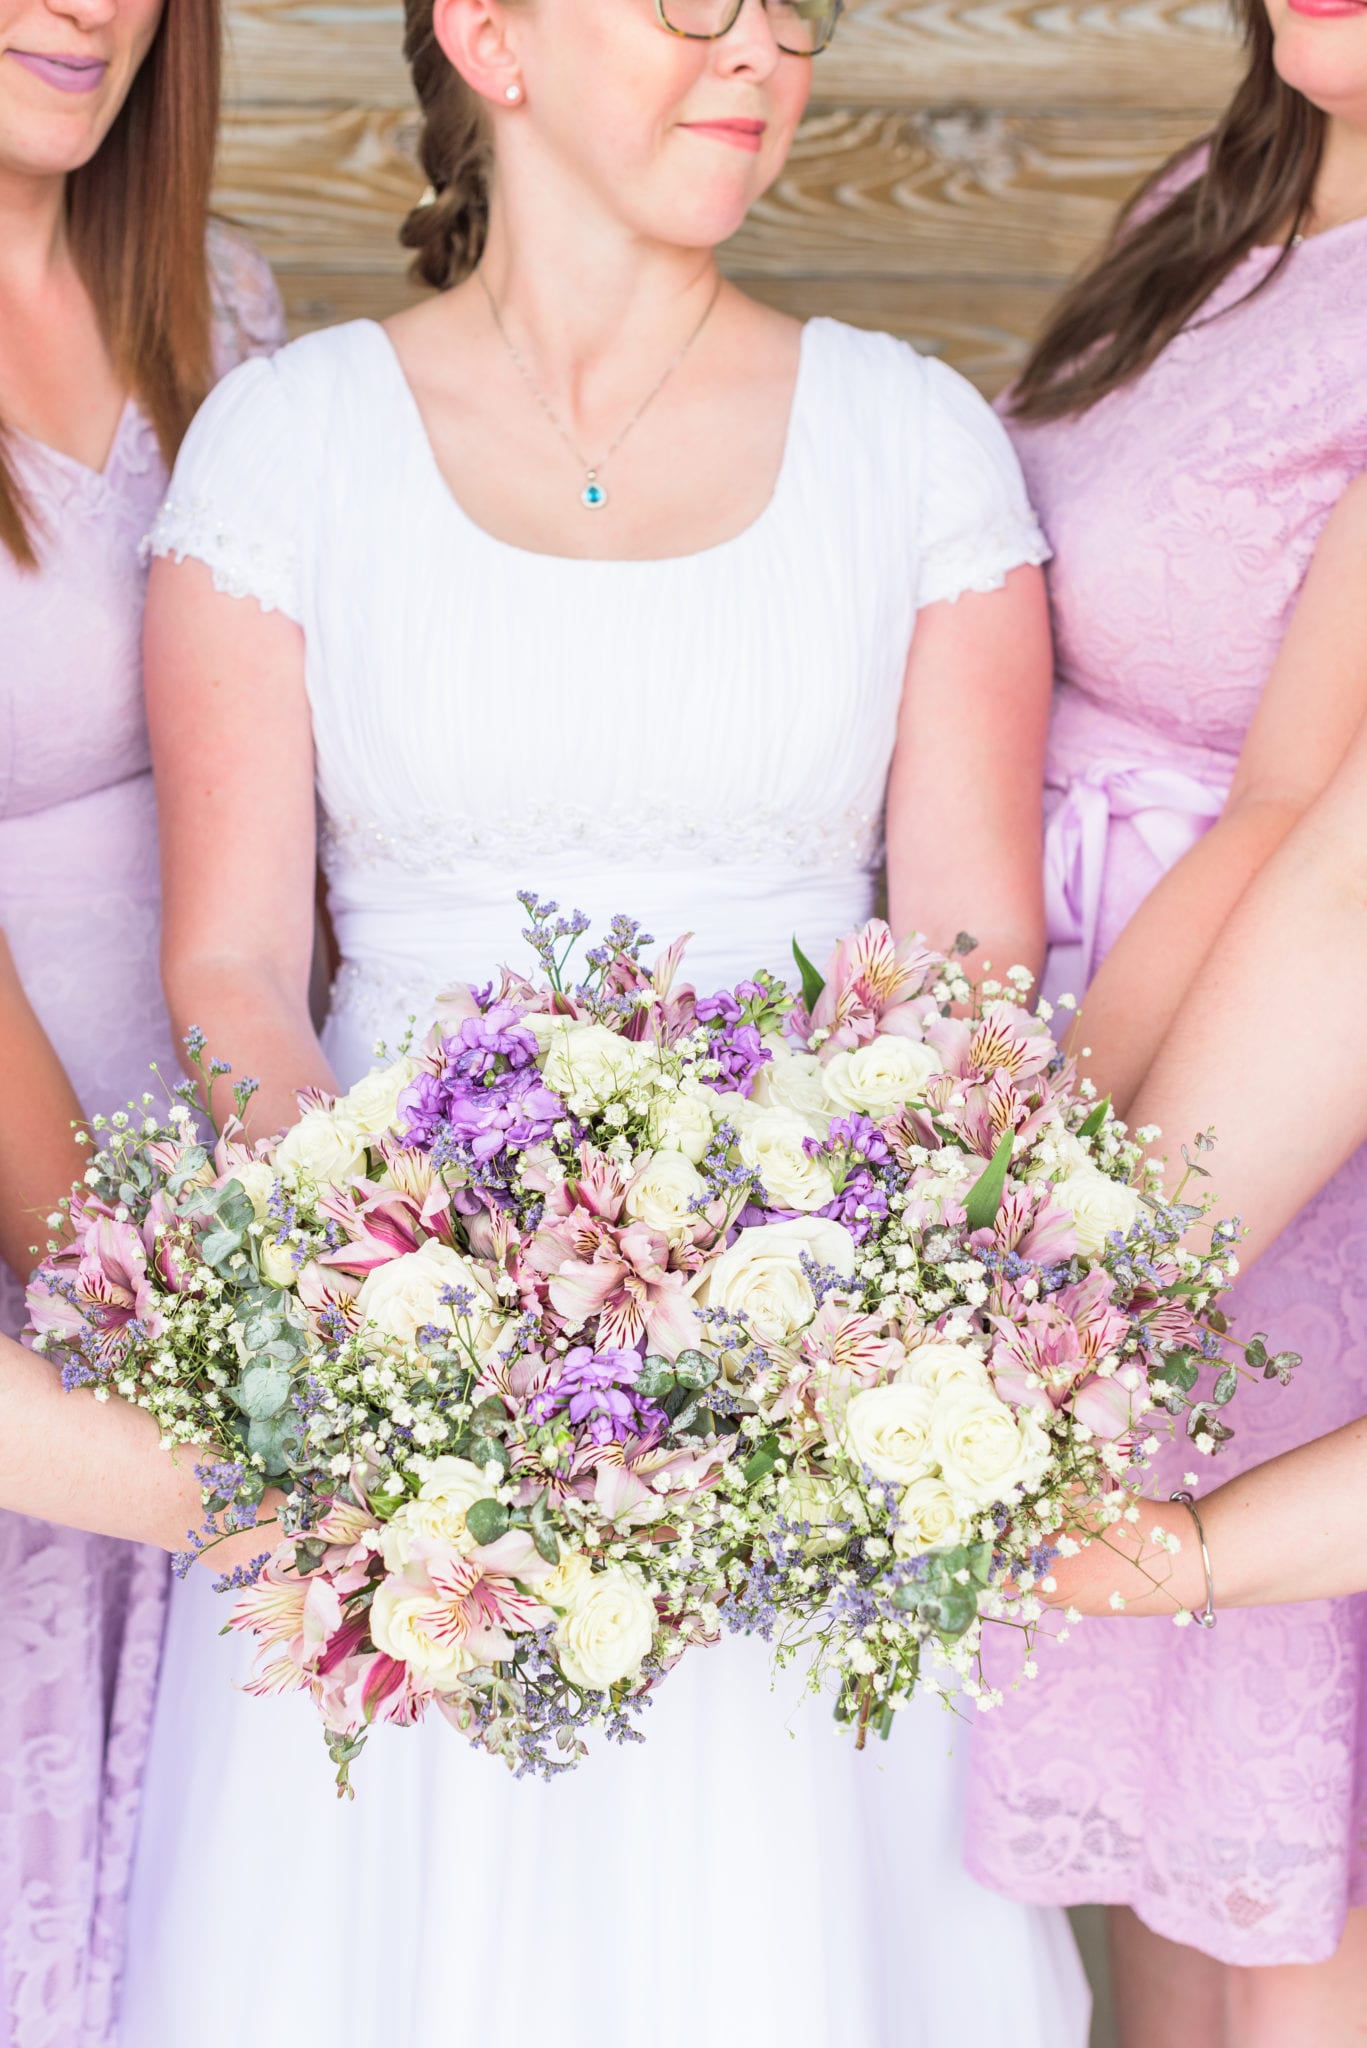 A flattering wedding pose that shows bridesmaids laughing and all of the flowers.